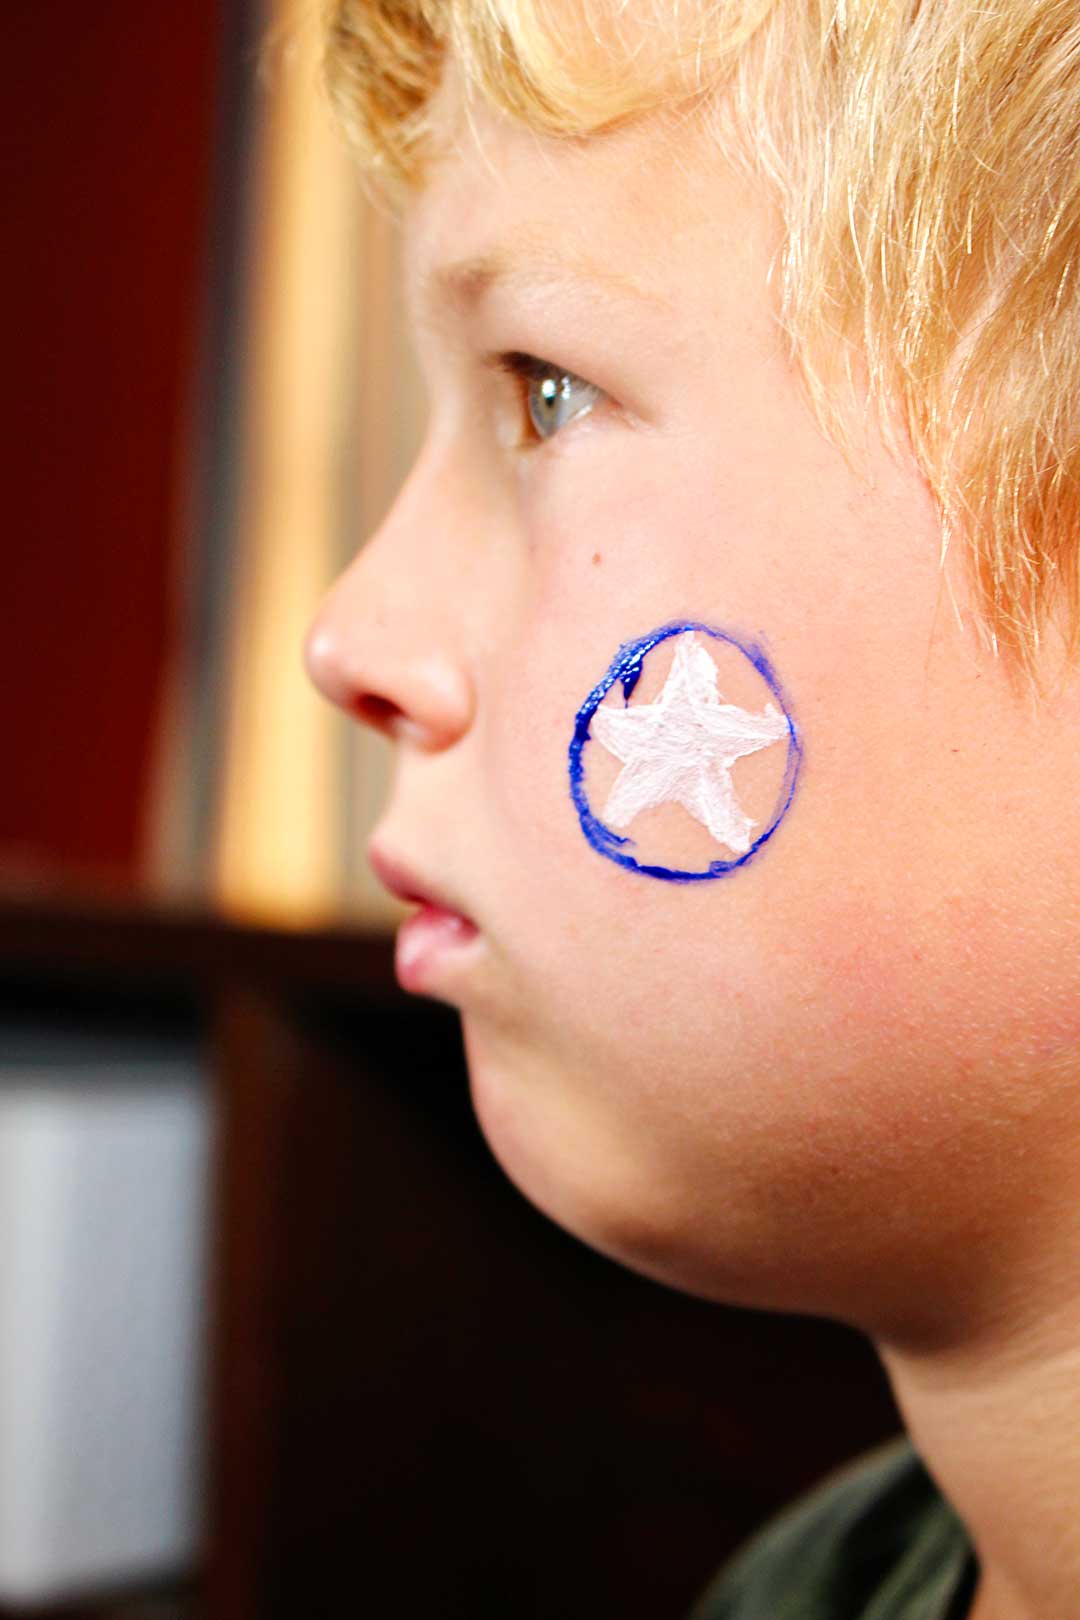 Profile of boy with white star and blue circle around it painted on cheek.